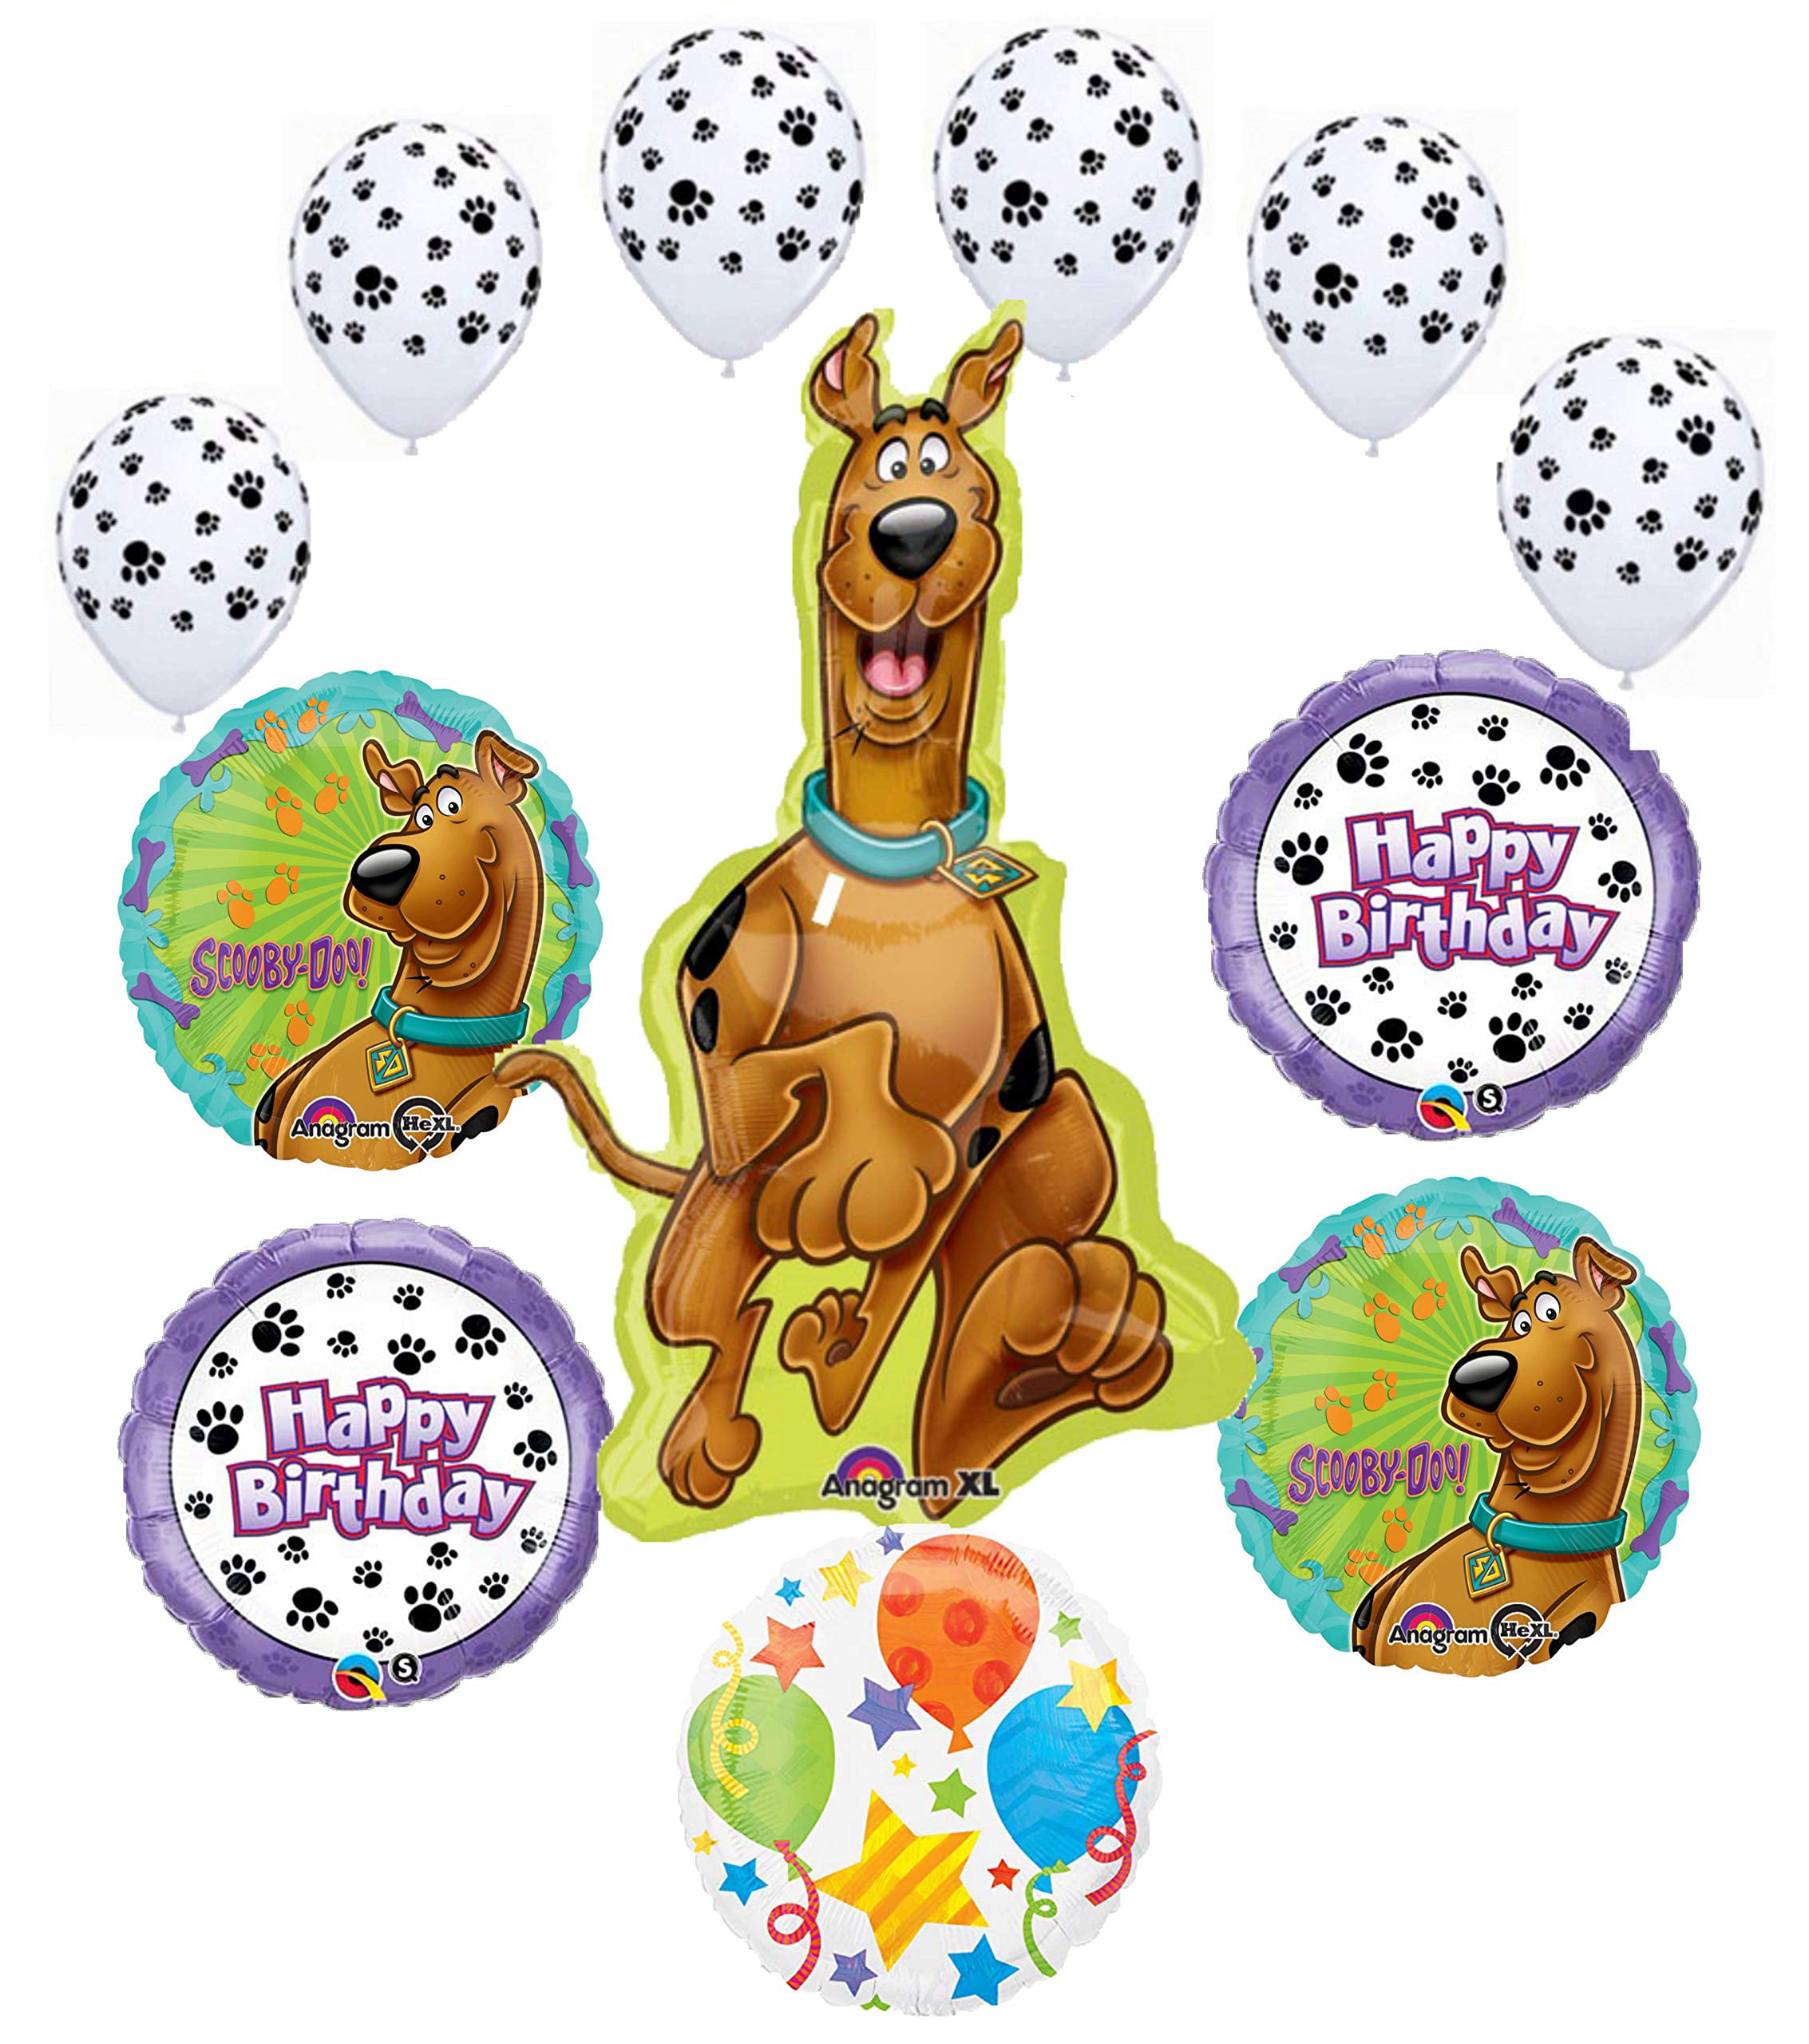 RUH ROH SCOOBY DOO Happy Birthday Party Balloons Decoration Supplies Dog Shaggy 